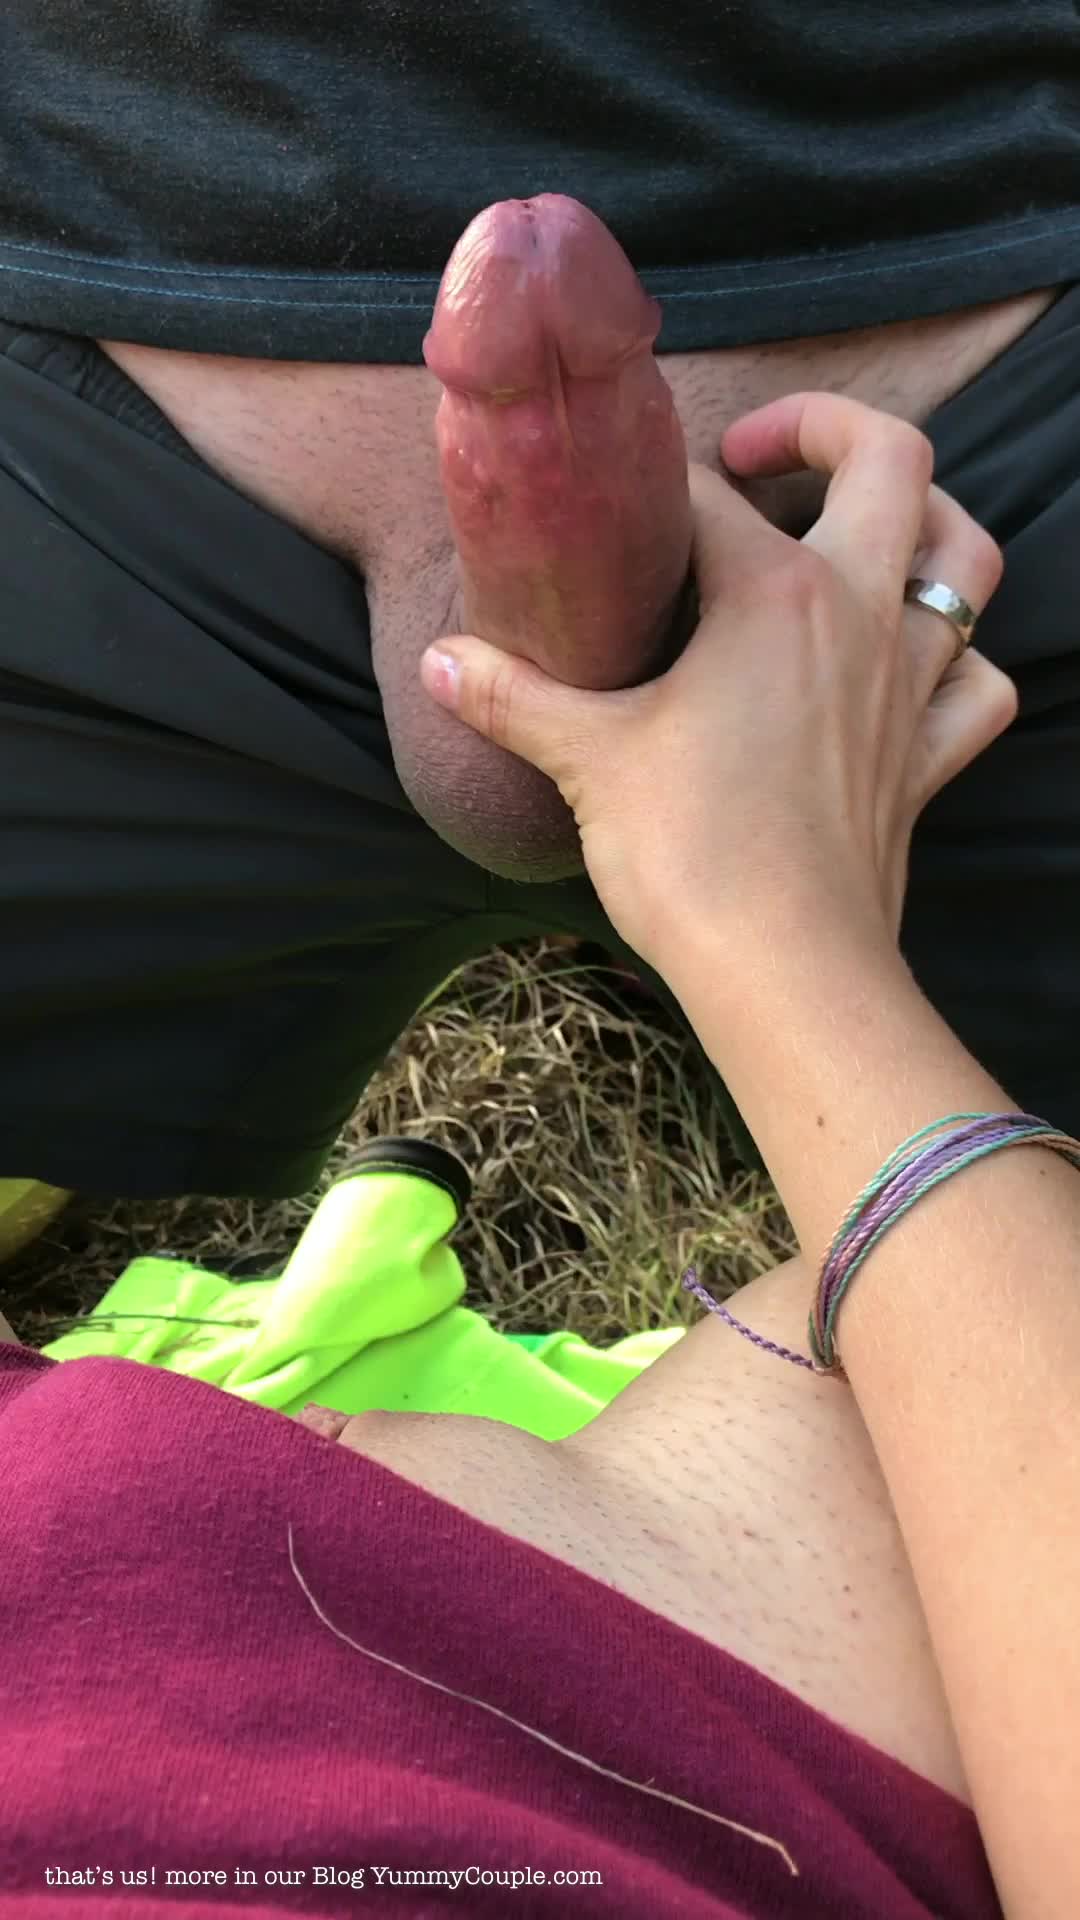 Milked The Biggest Cumshot All Over Me. Cows Were Watching.